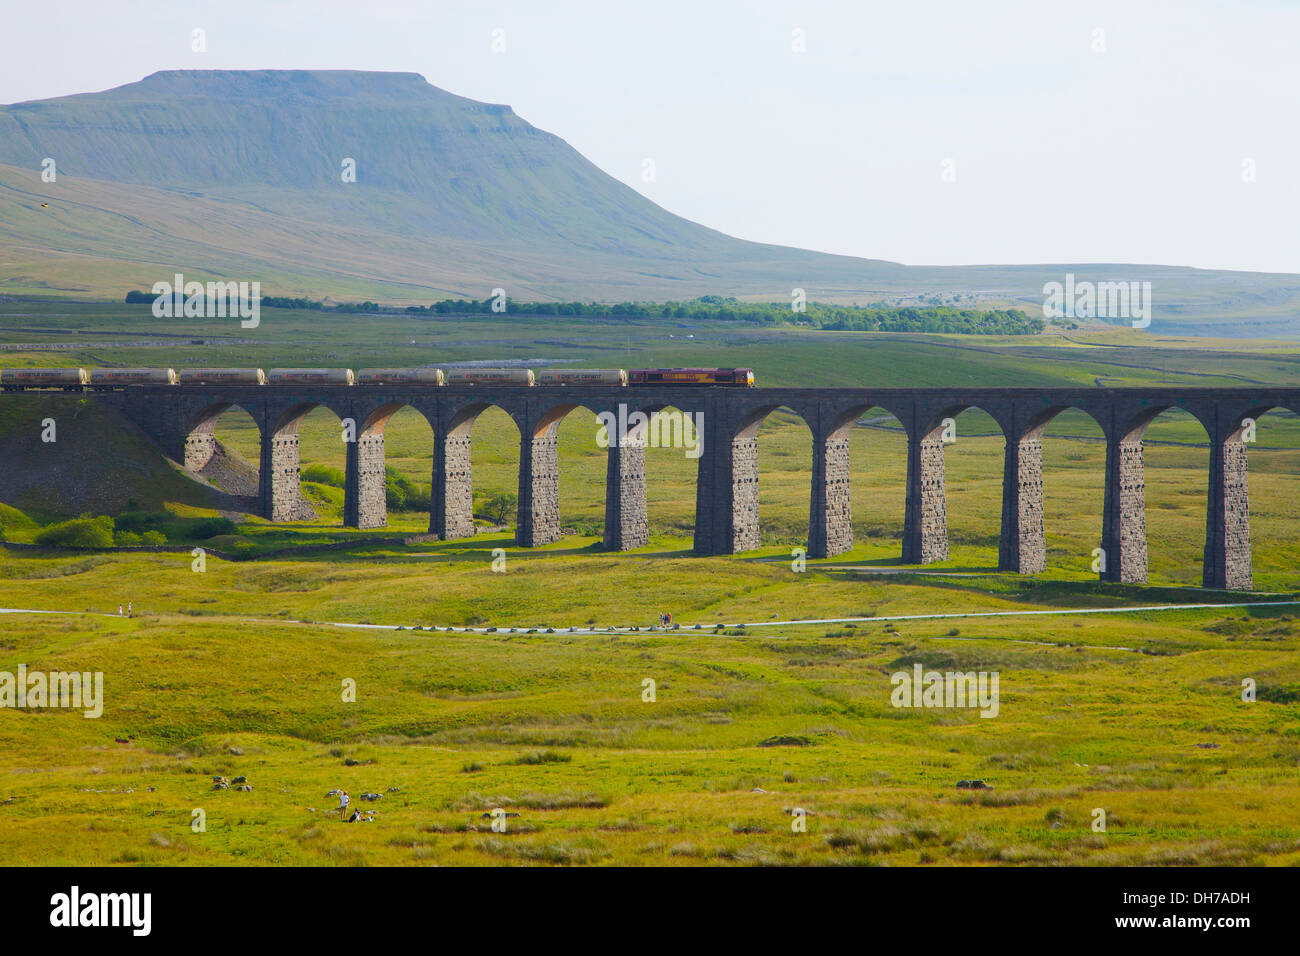 Freight train on Ribblehead Viaduct below Ingleborough mountain Yorkshire Dales National Park North Yorkshire England UK Stock Photo